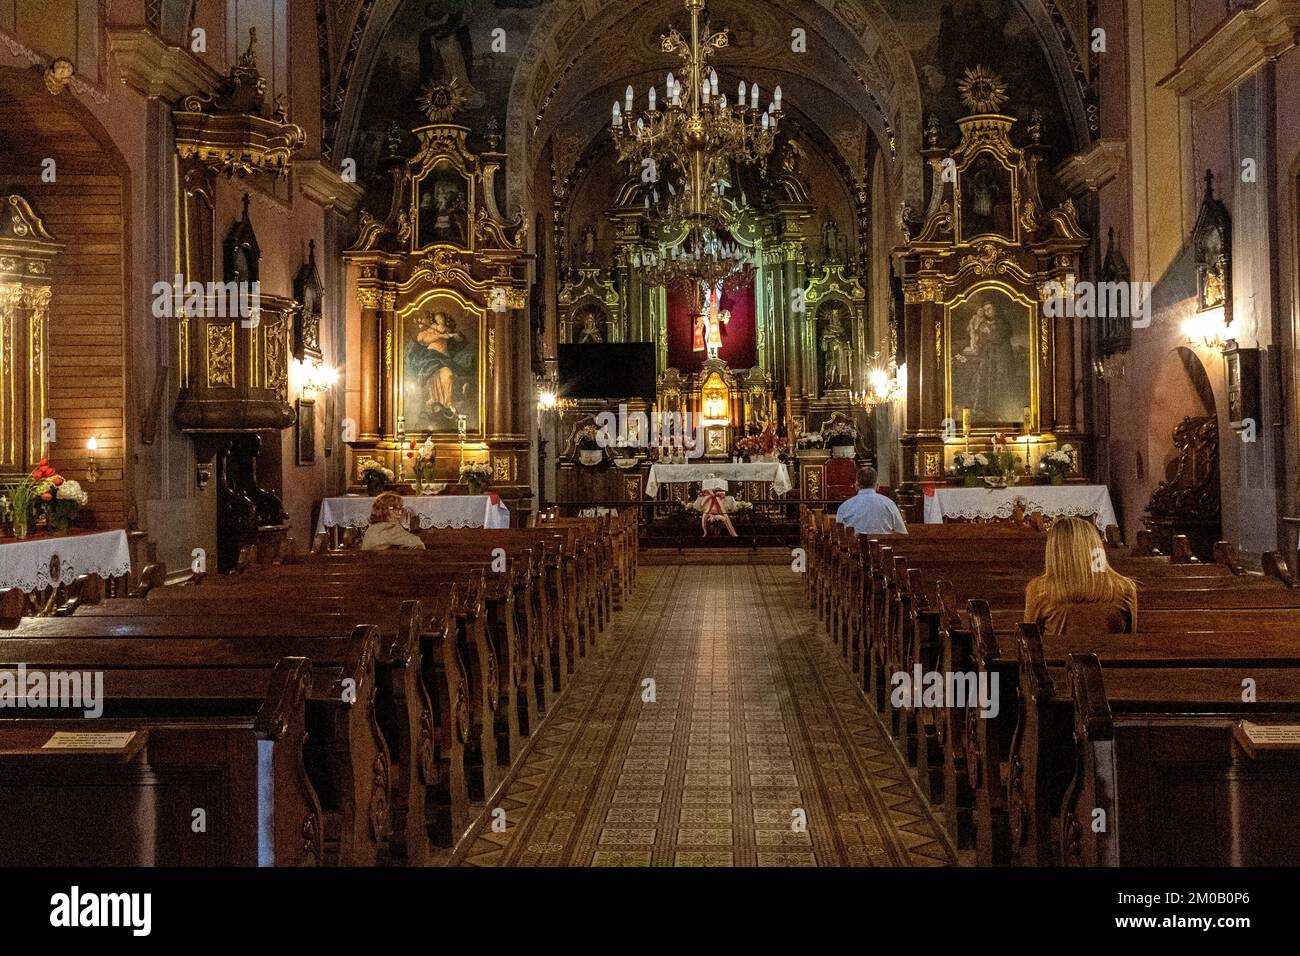 Przemysl, Poland. Interior of the Roman Catholic Church down town, where people have all day access to Pray and Contemplate. Stock Photo